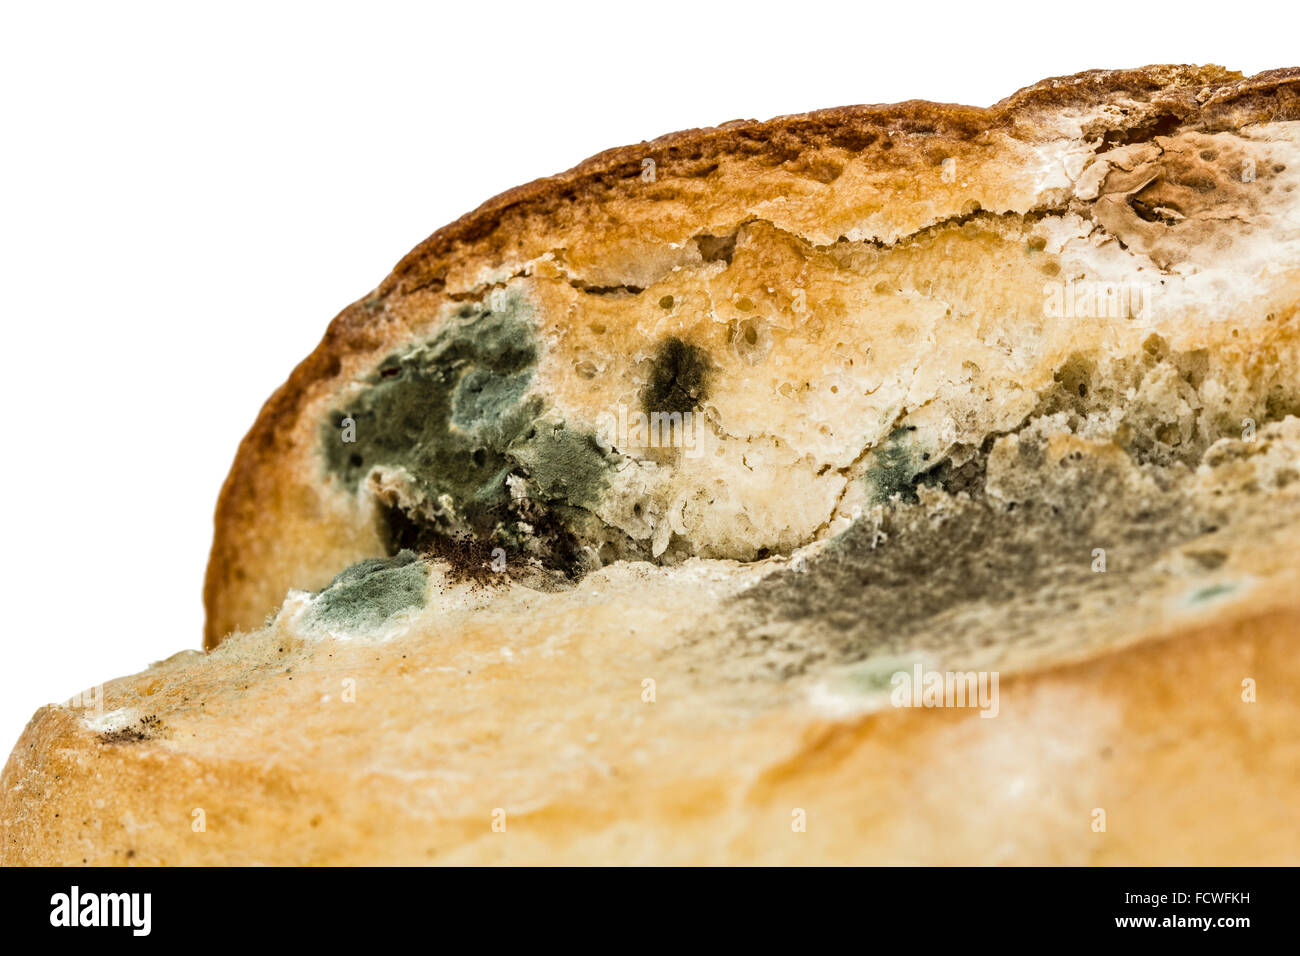 Moldy bread close-up, isolated on white background Stock Photo - Alamy